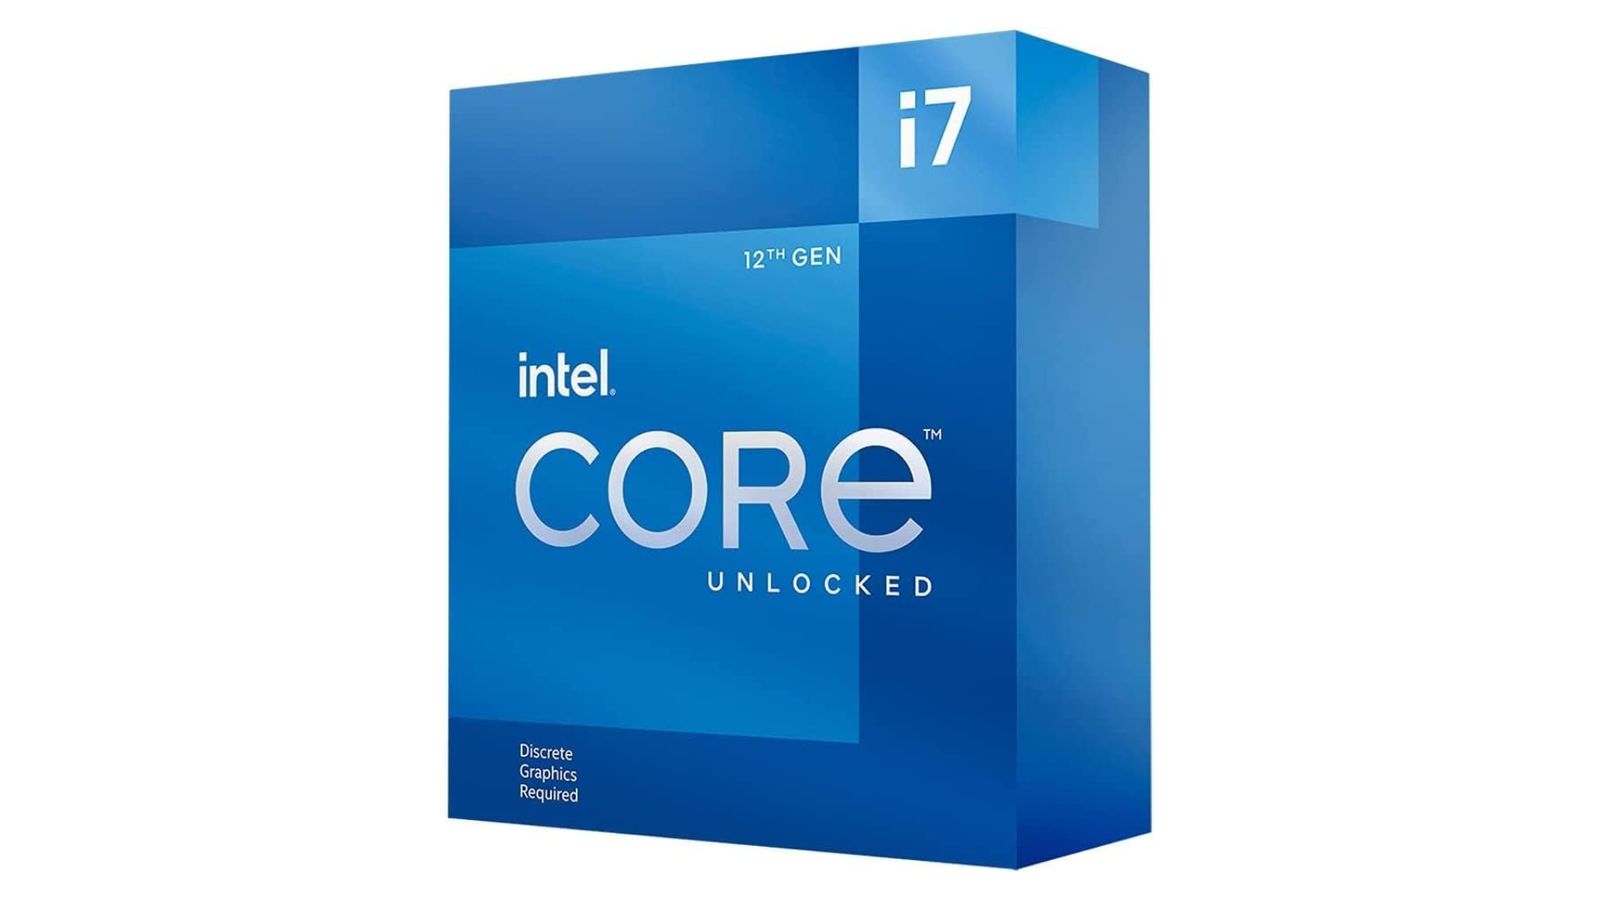 Intel Core i7-12700KF product image of a blue box with white Intel branding.